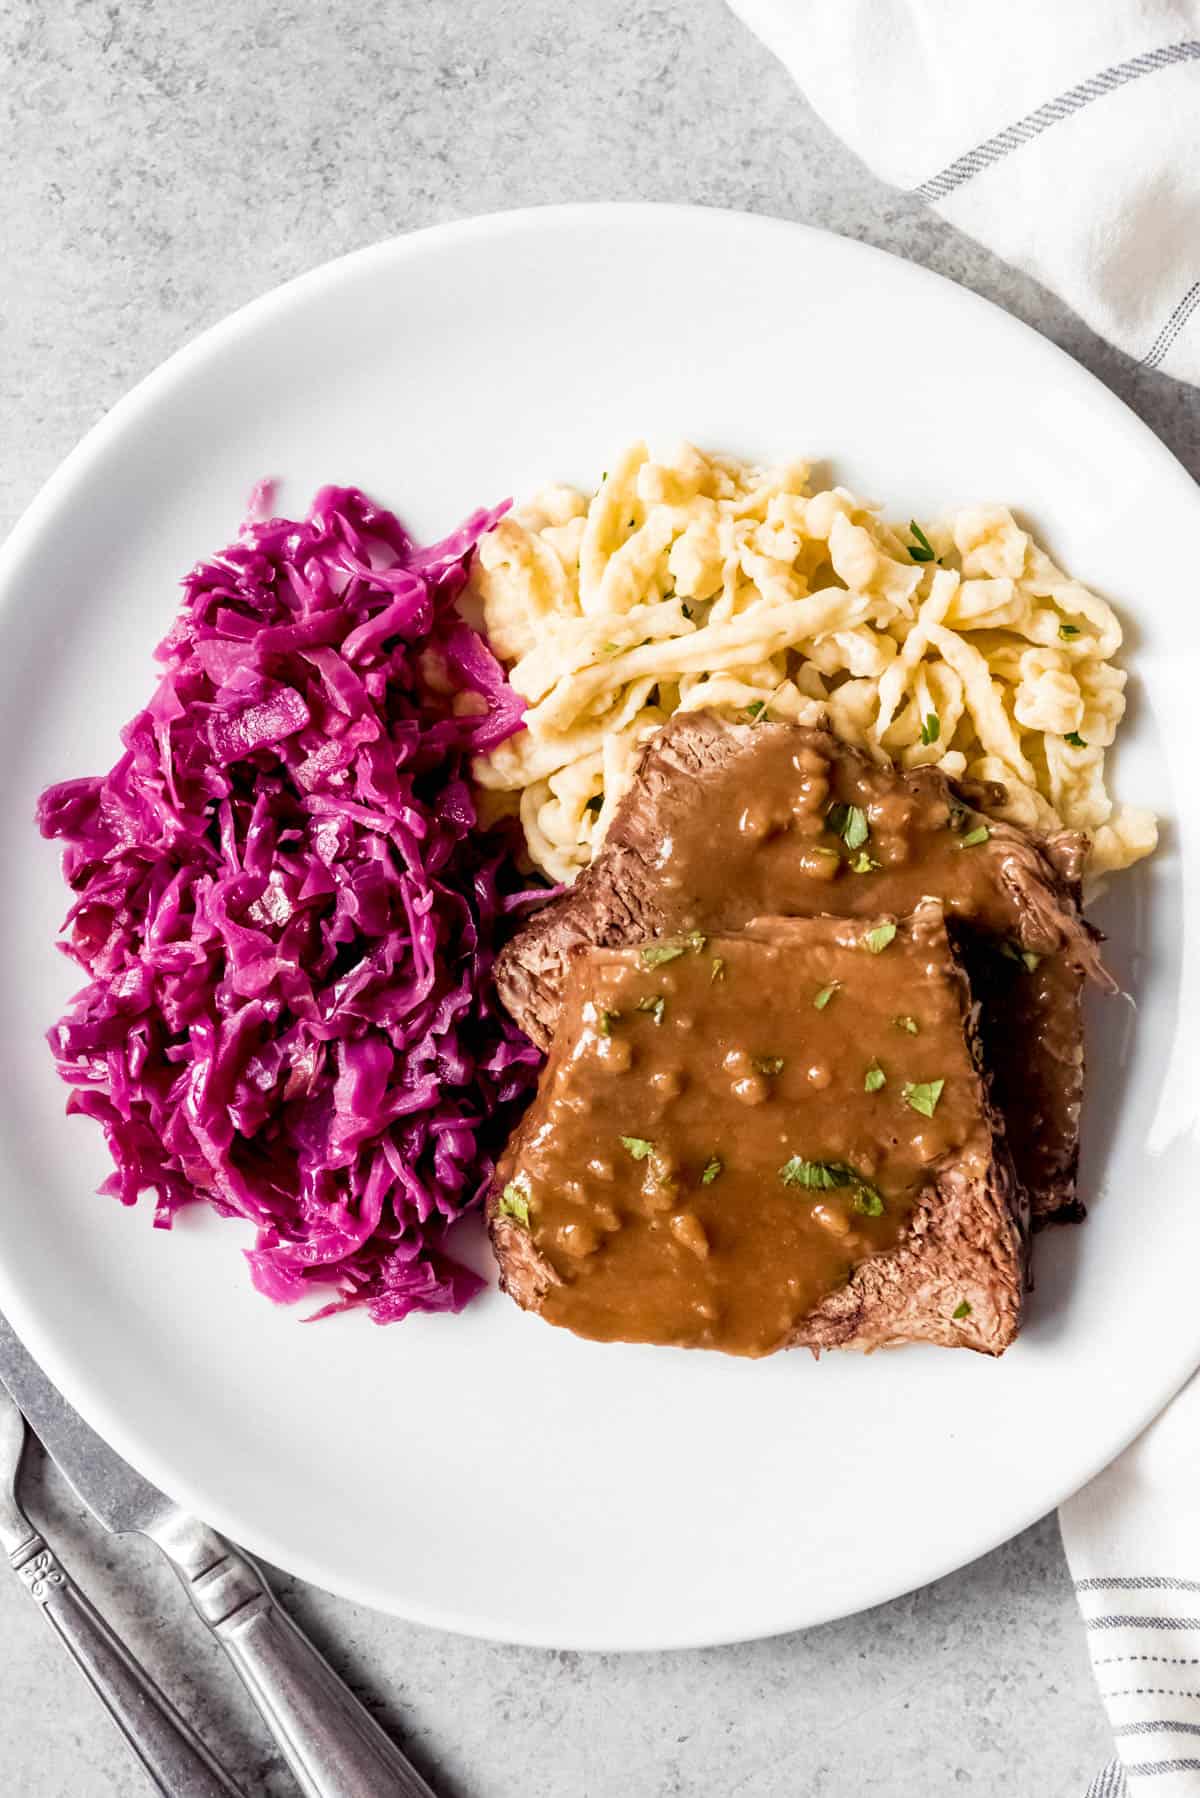 An image of authentic sauerbraten with rotkohl (German red cabbage) and spaetzle on a plate.